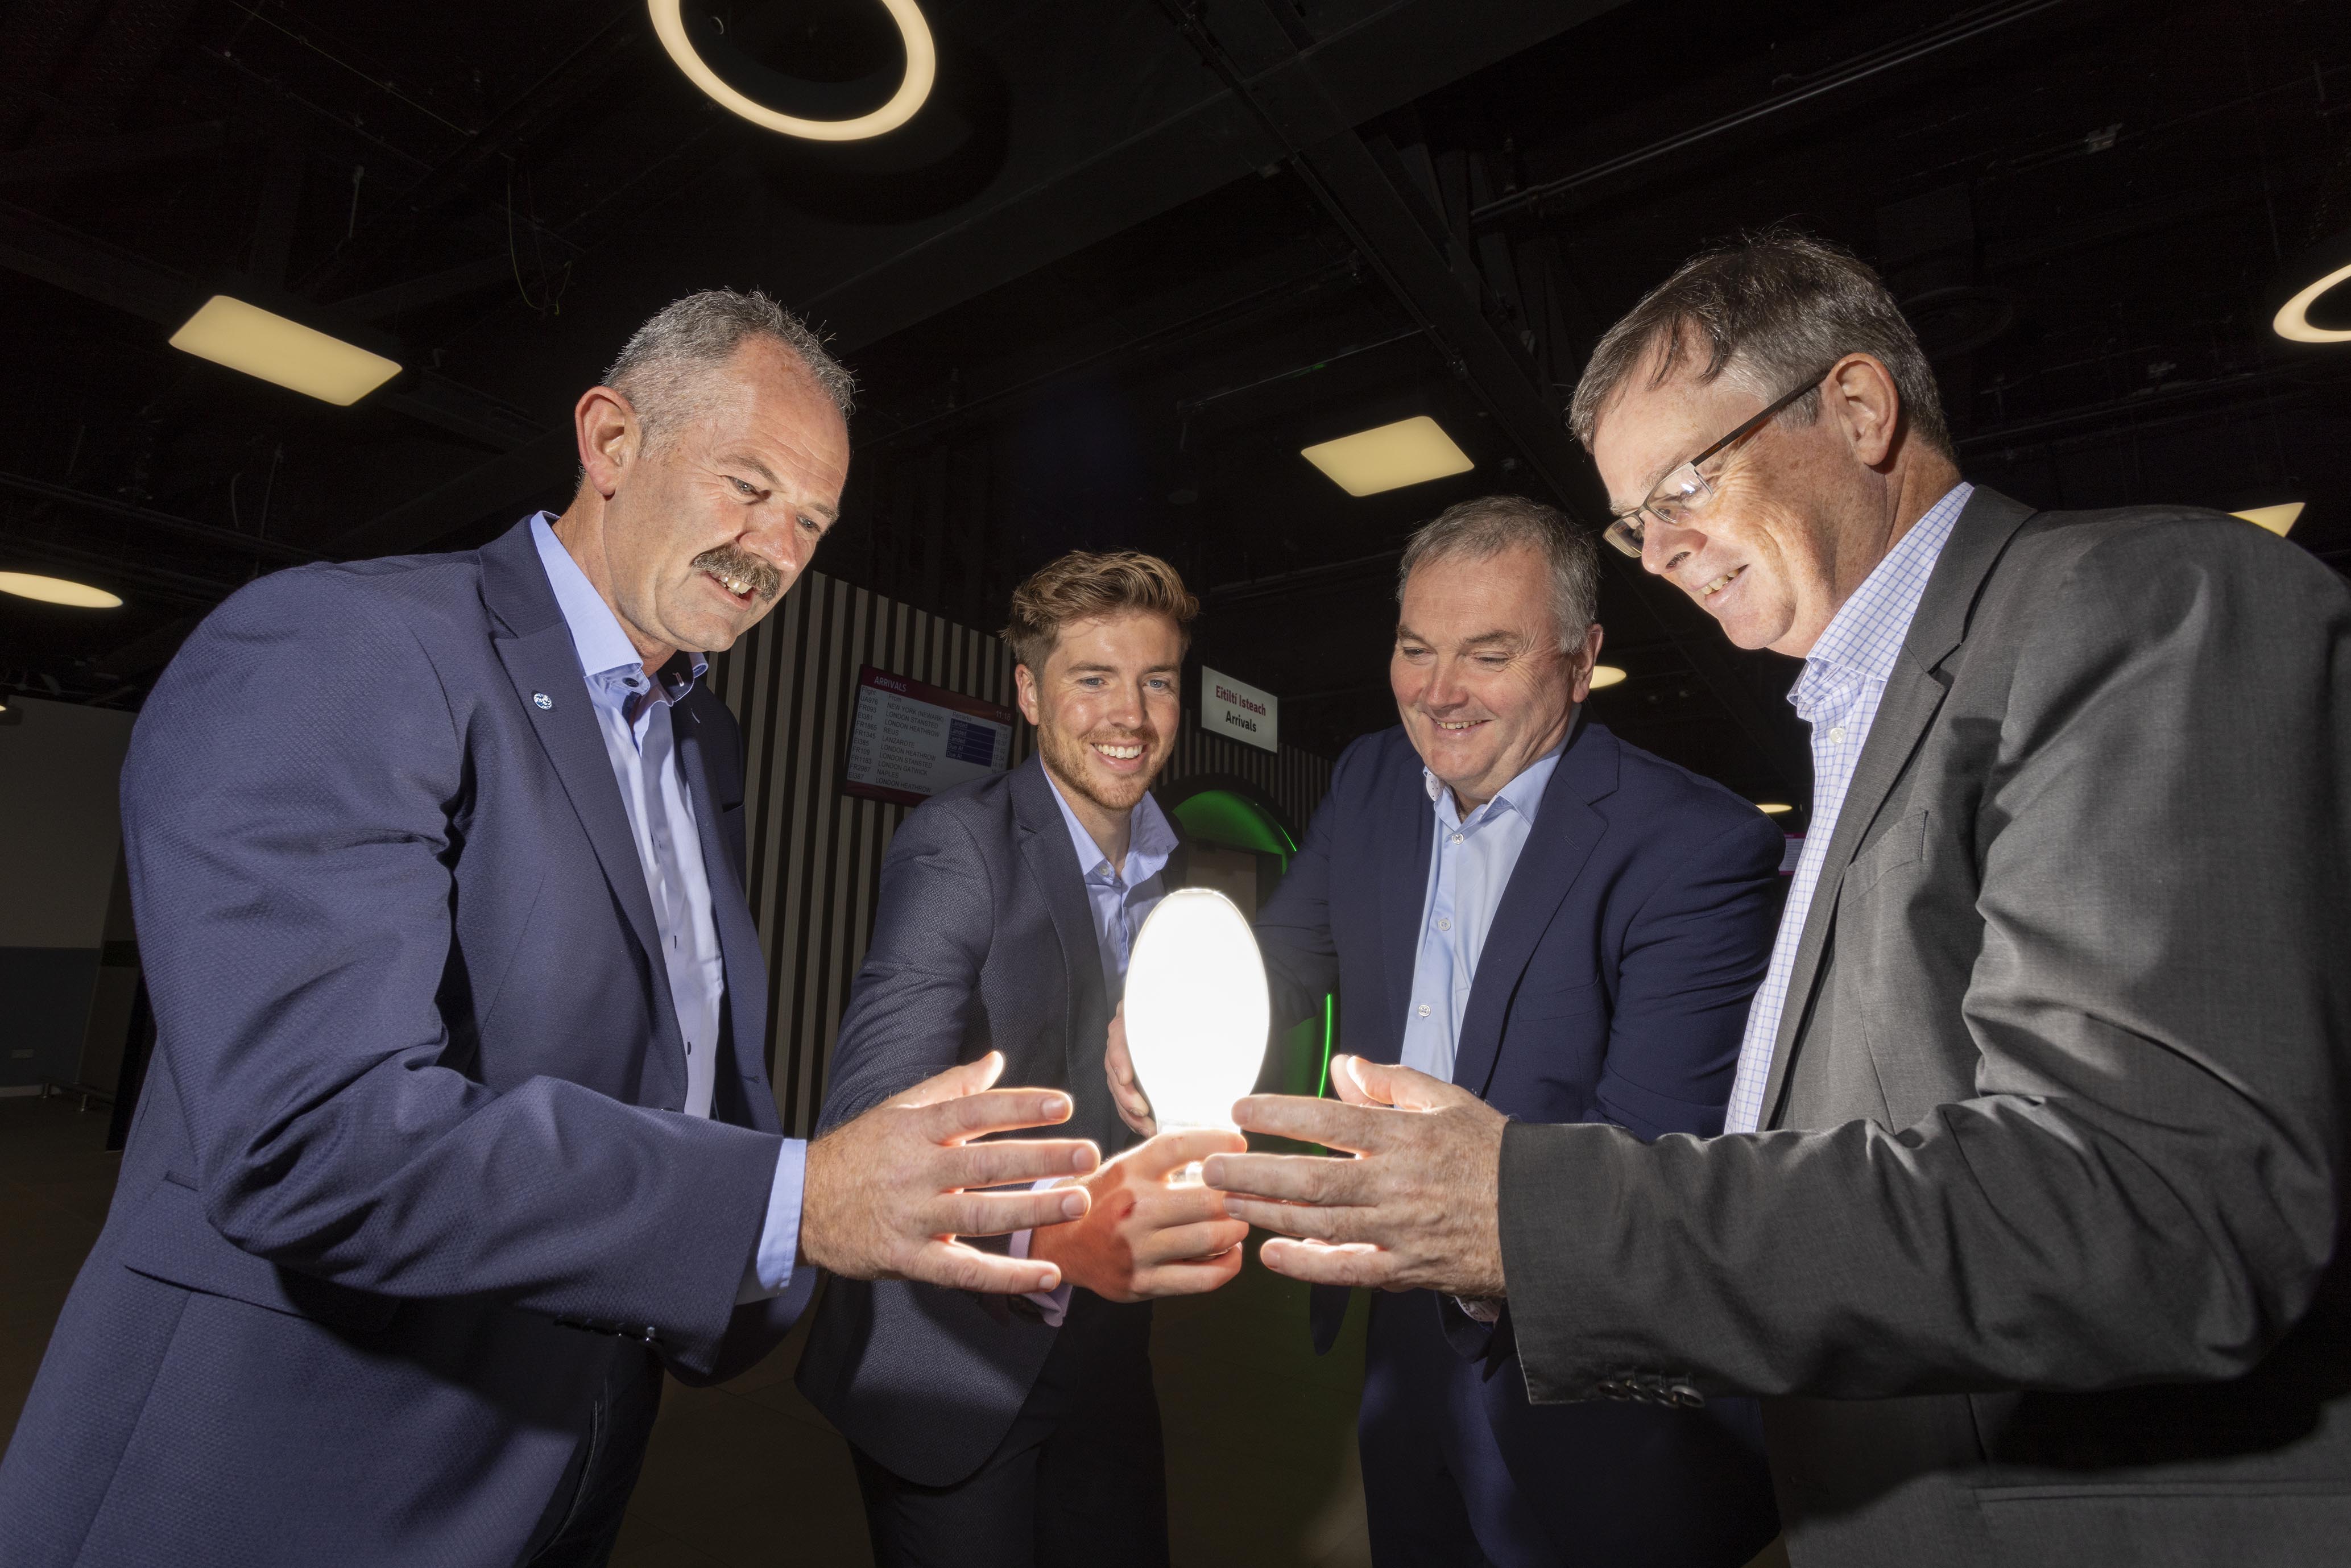 Four men dressed in suits all holding a lightbulb.